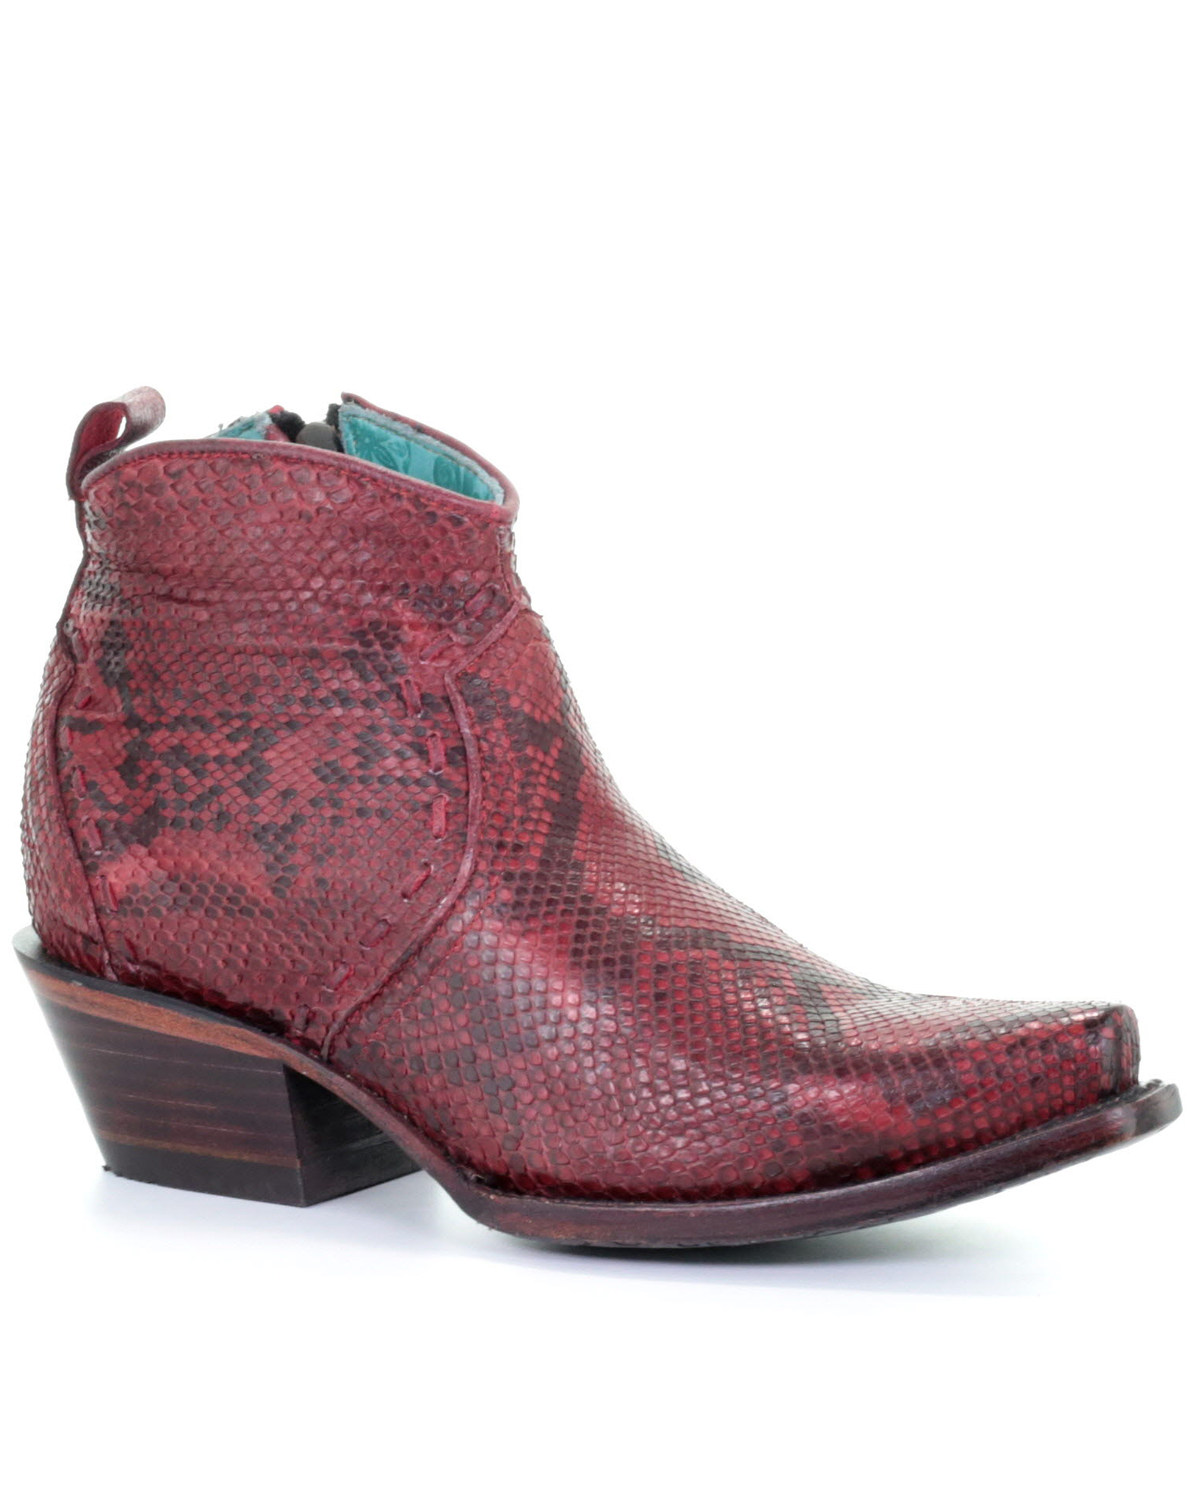 Corral Women's Red Python Fashion Booties - Snip Toe | Boot Barn